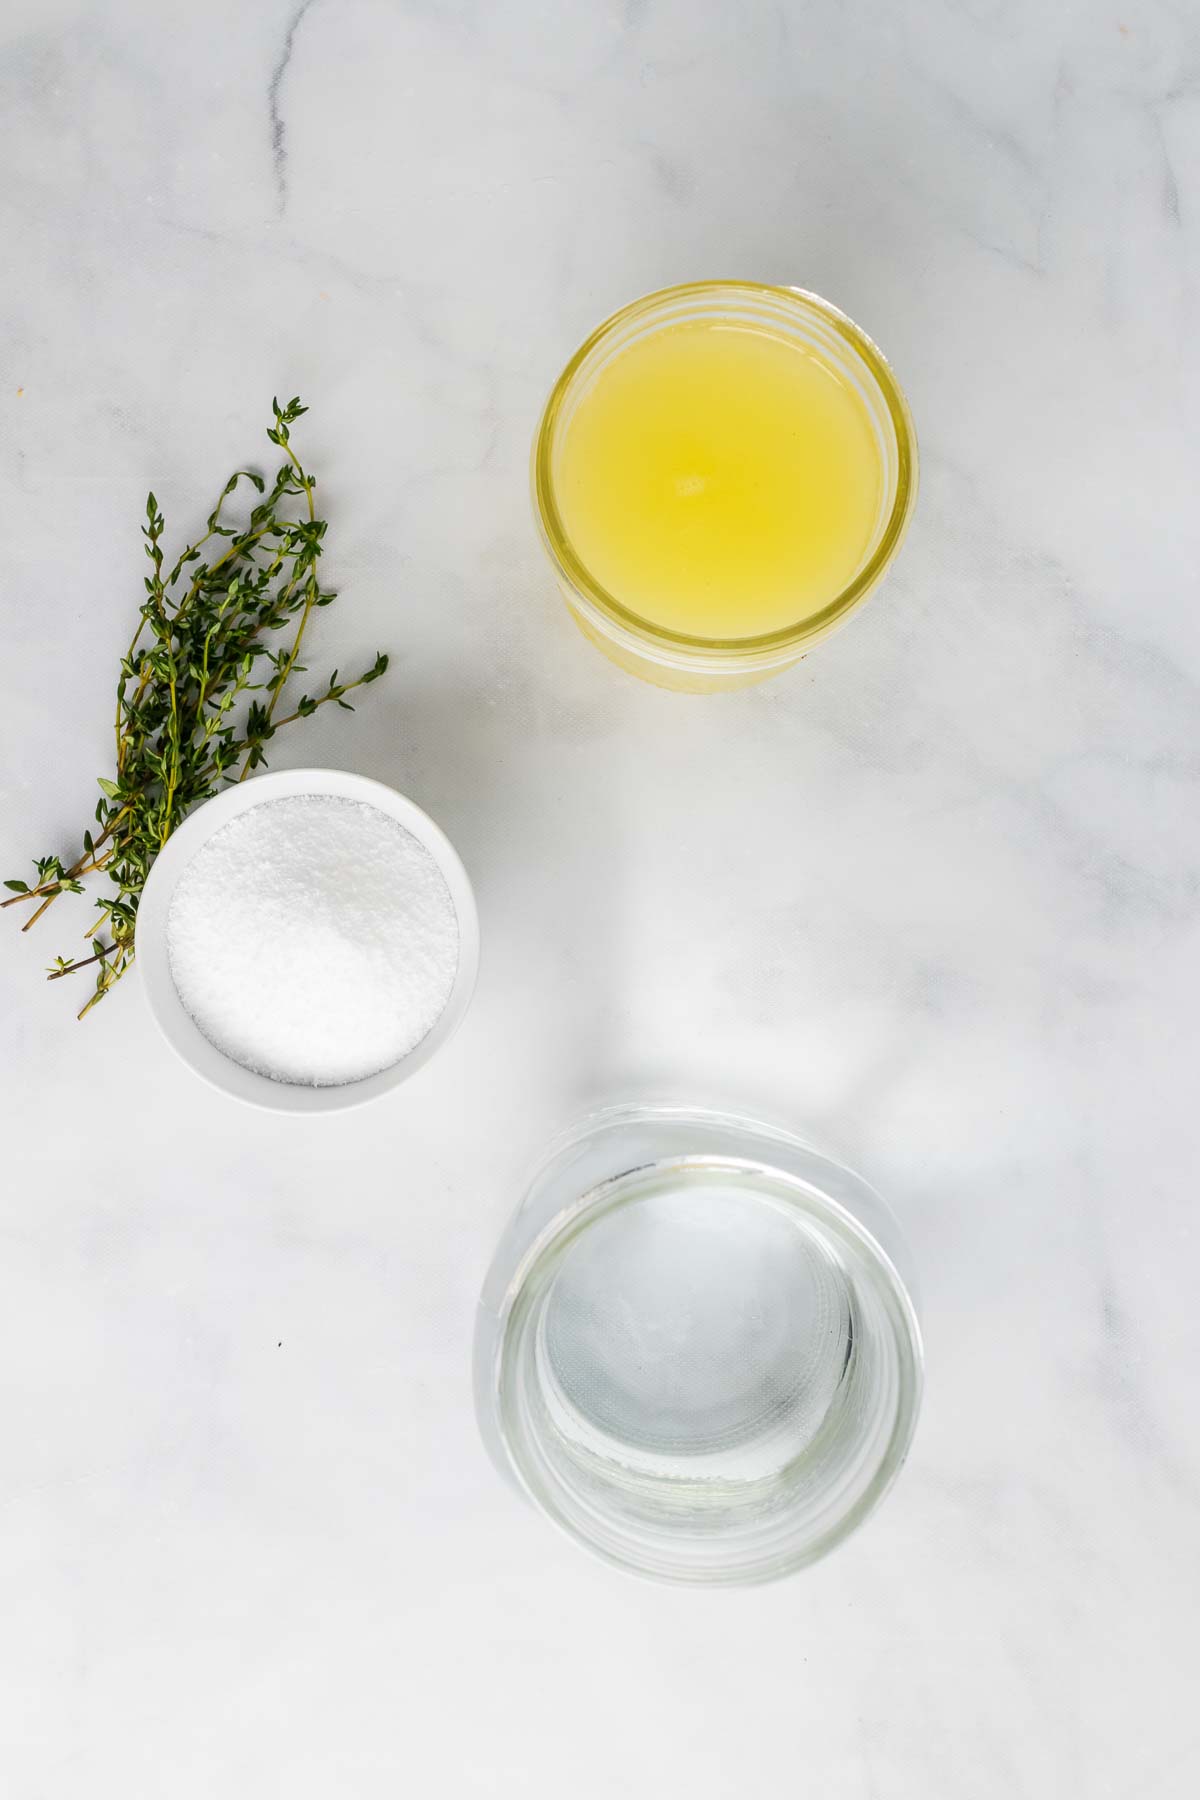 Ingredients for the lemonade on a marble surface